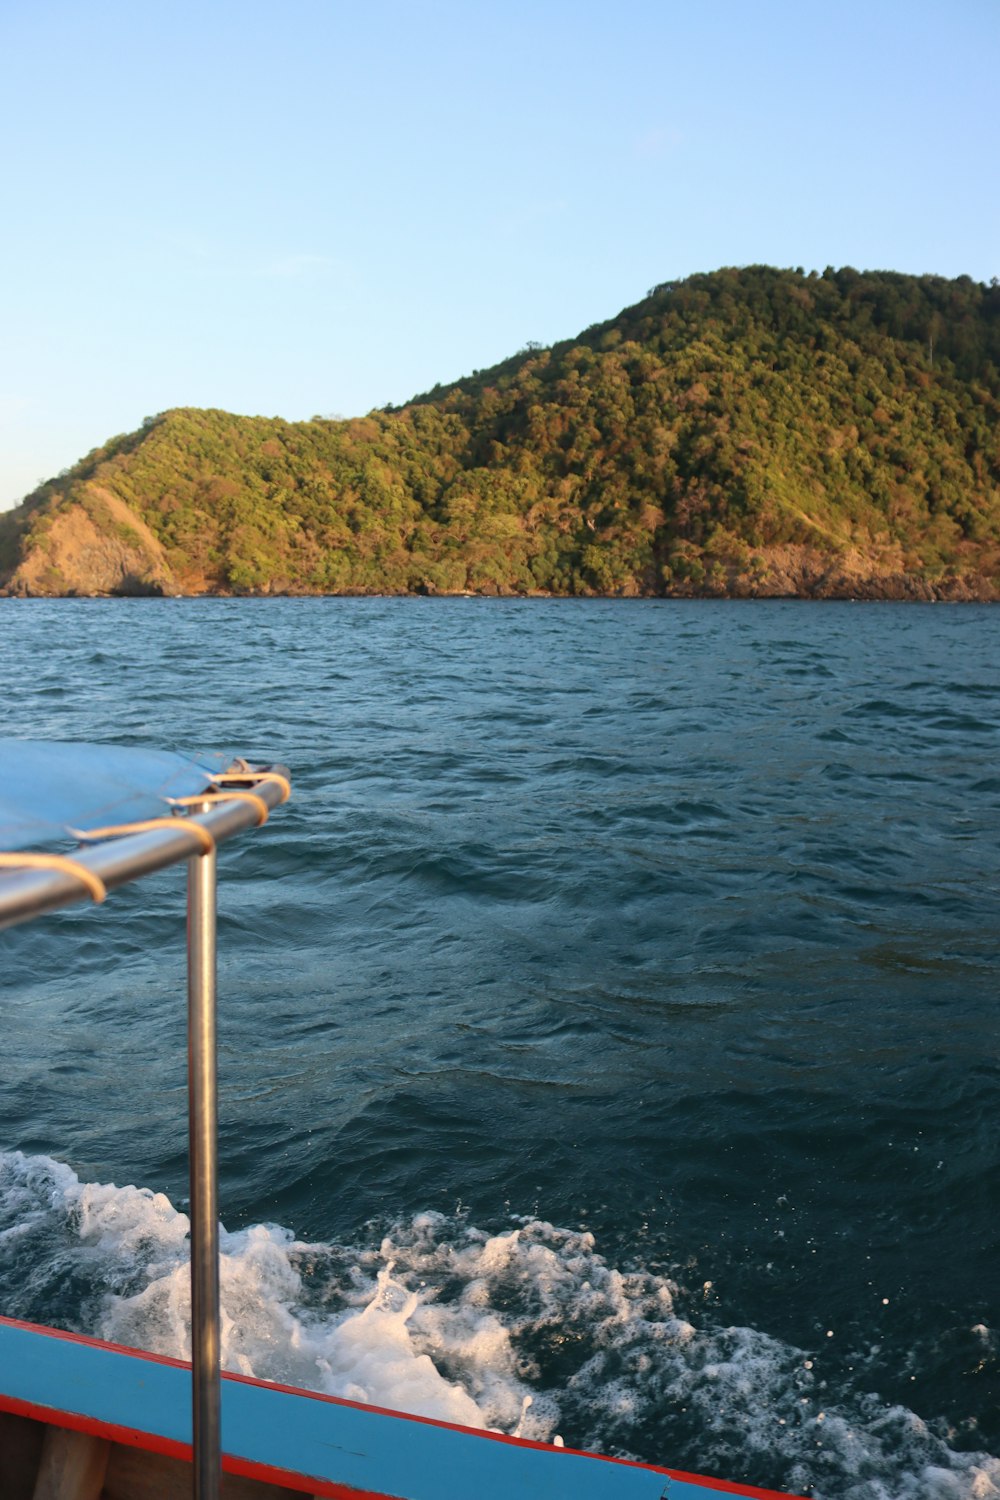 a boat traveling on a body of water with a mountain in the background